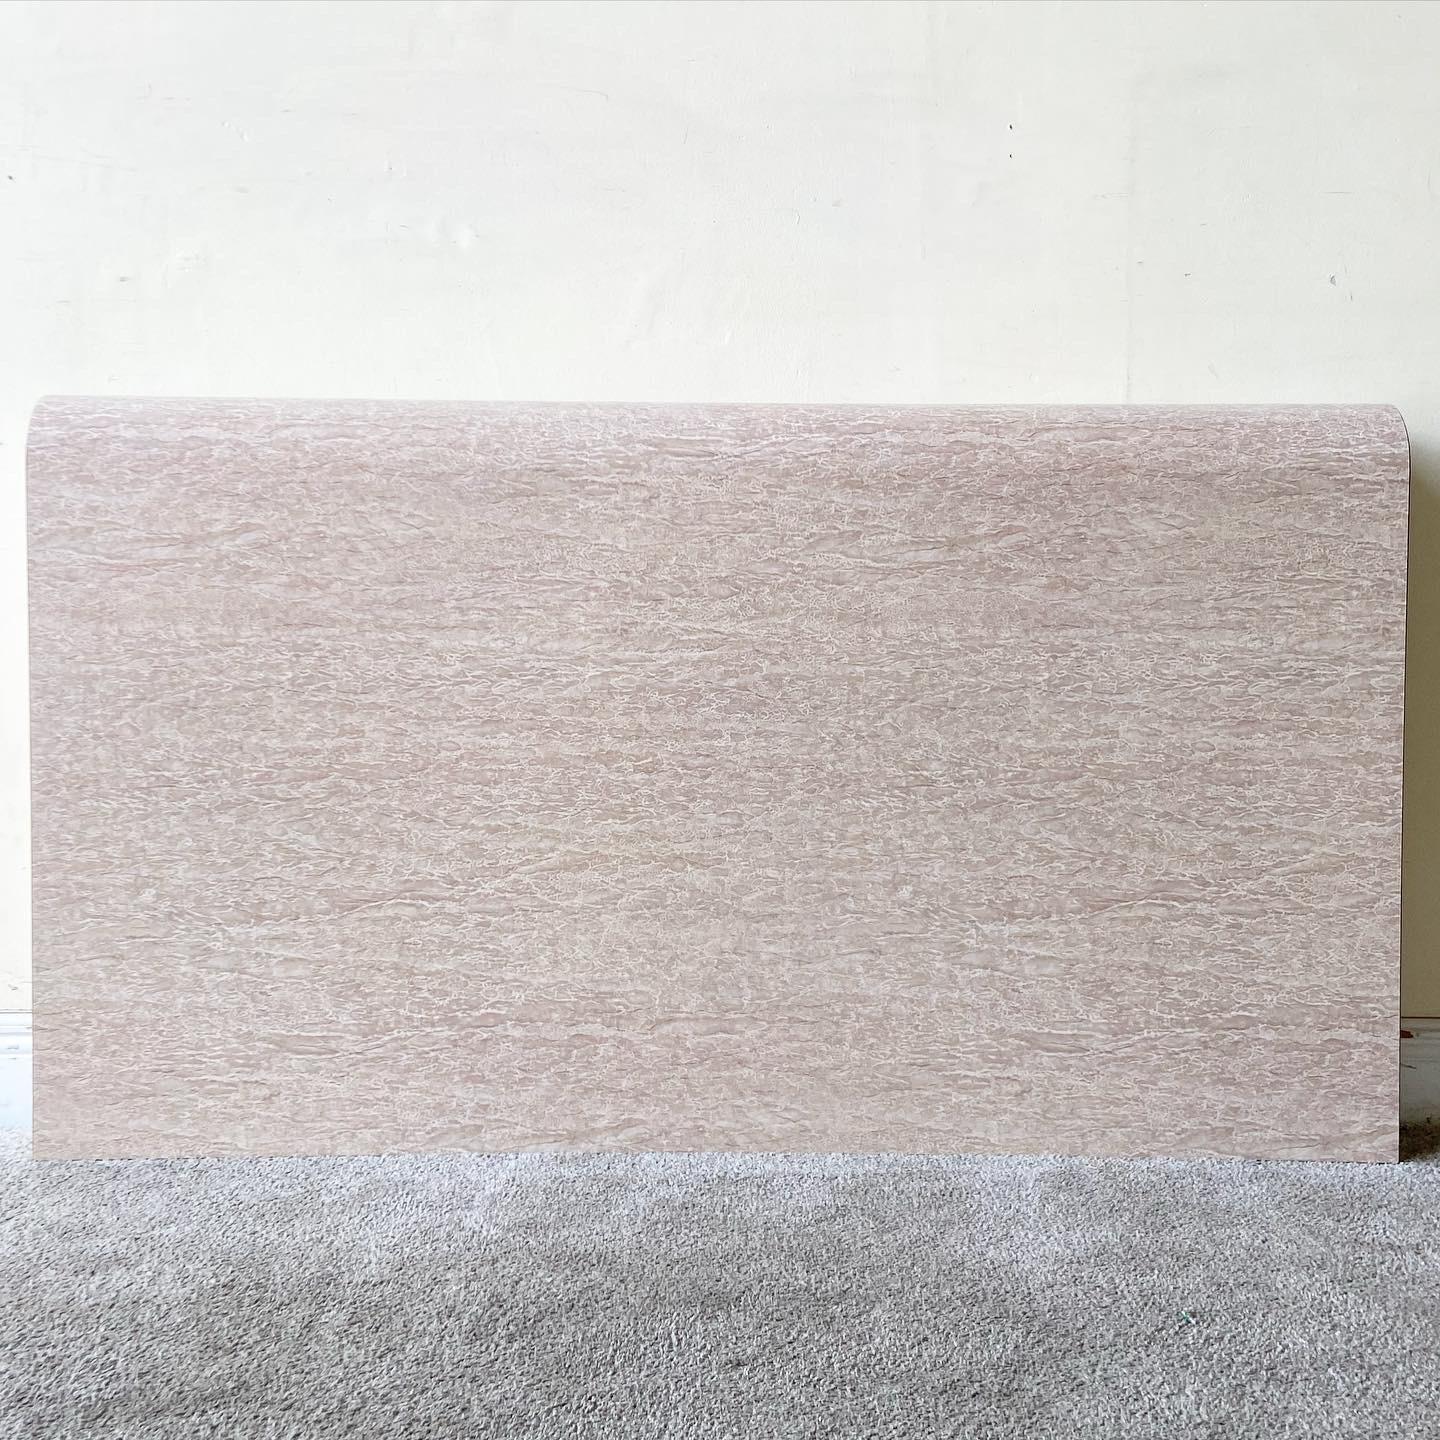 Exceptional postmodern waterfall headboard. Features a tan/beige faux marble laminate.